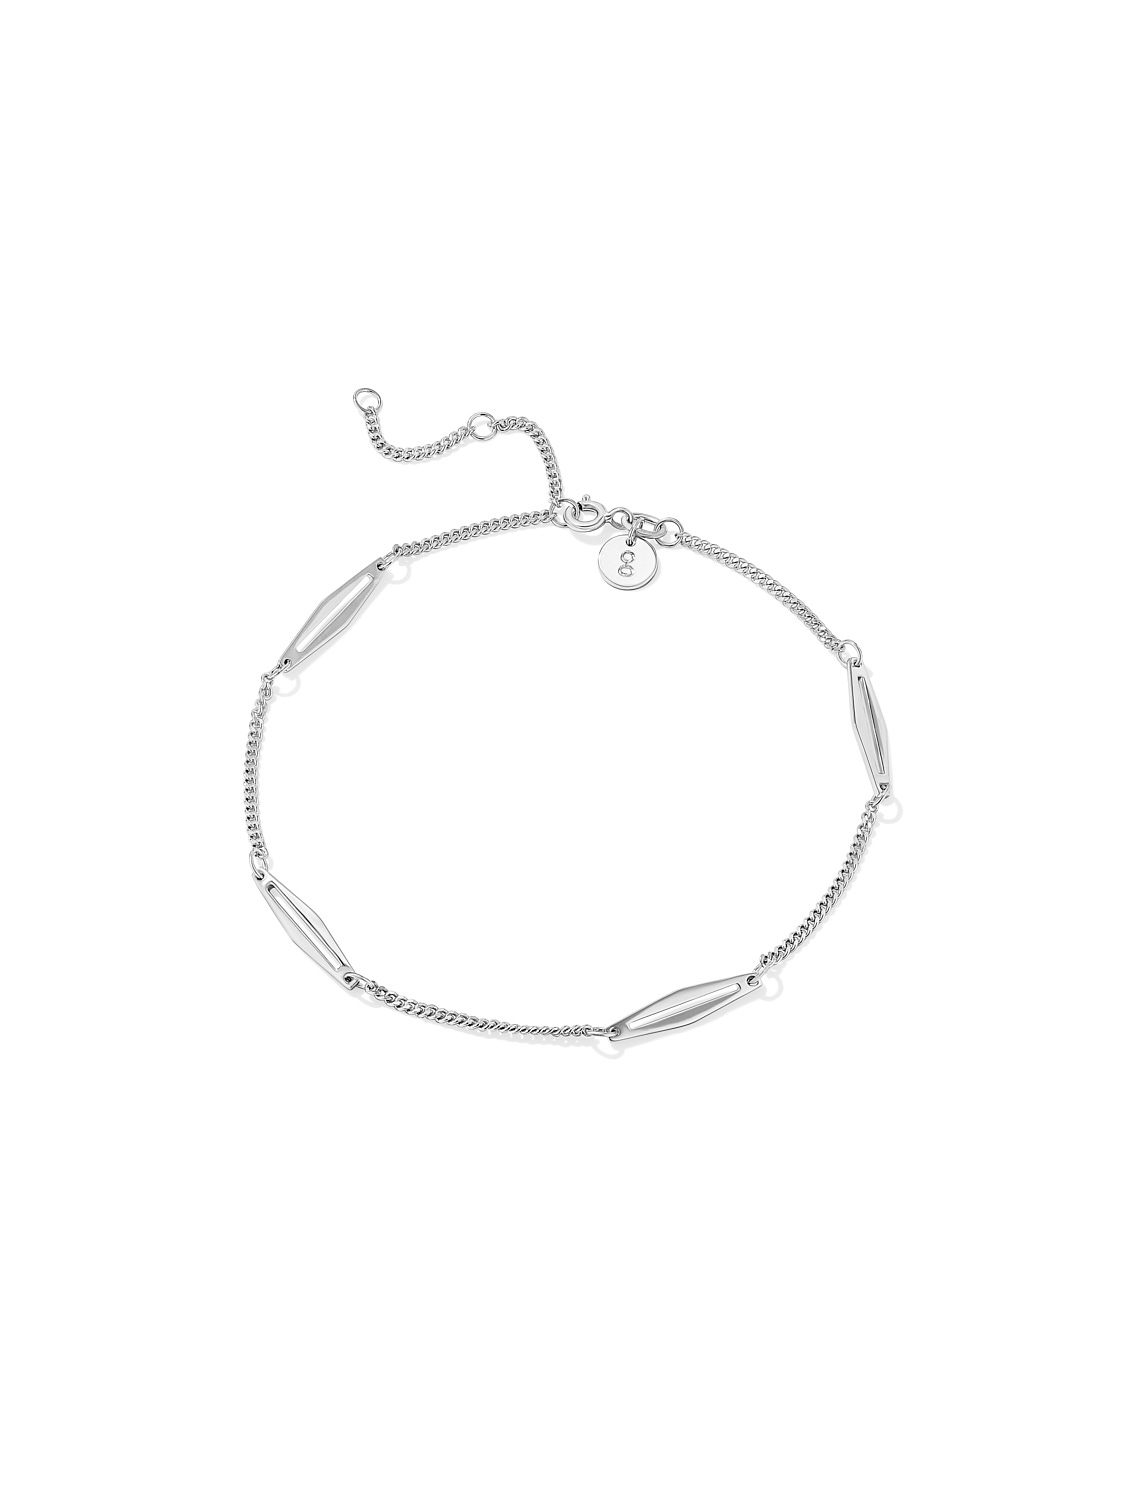 CHAIN OF EVENTS ANKLET  